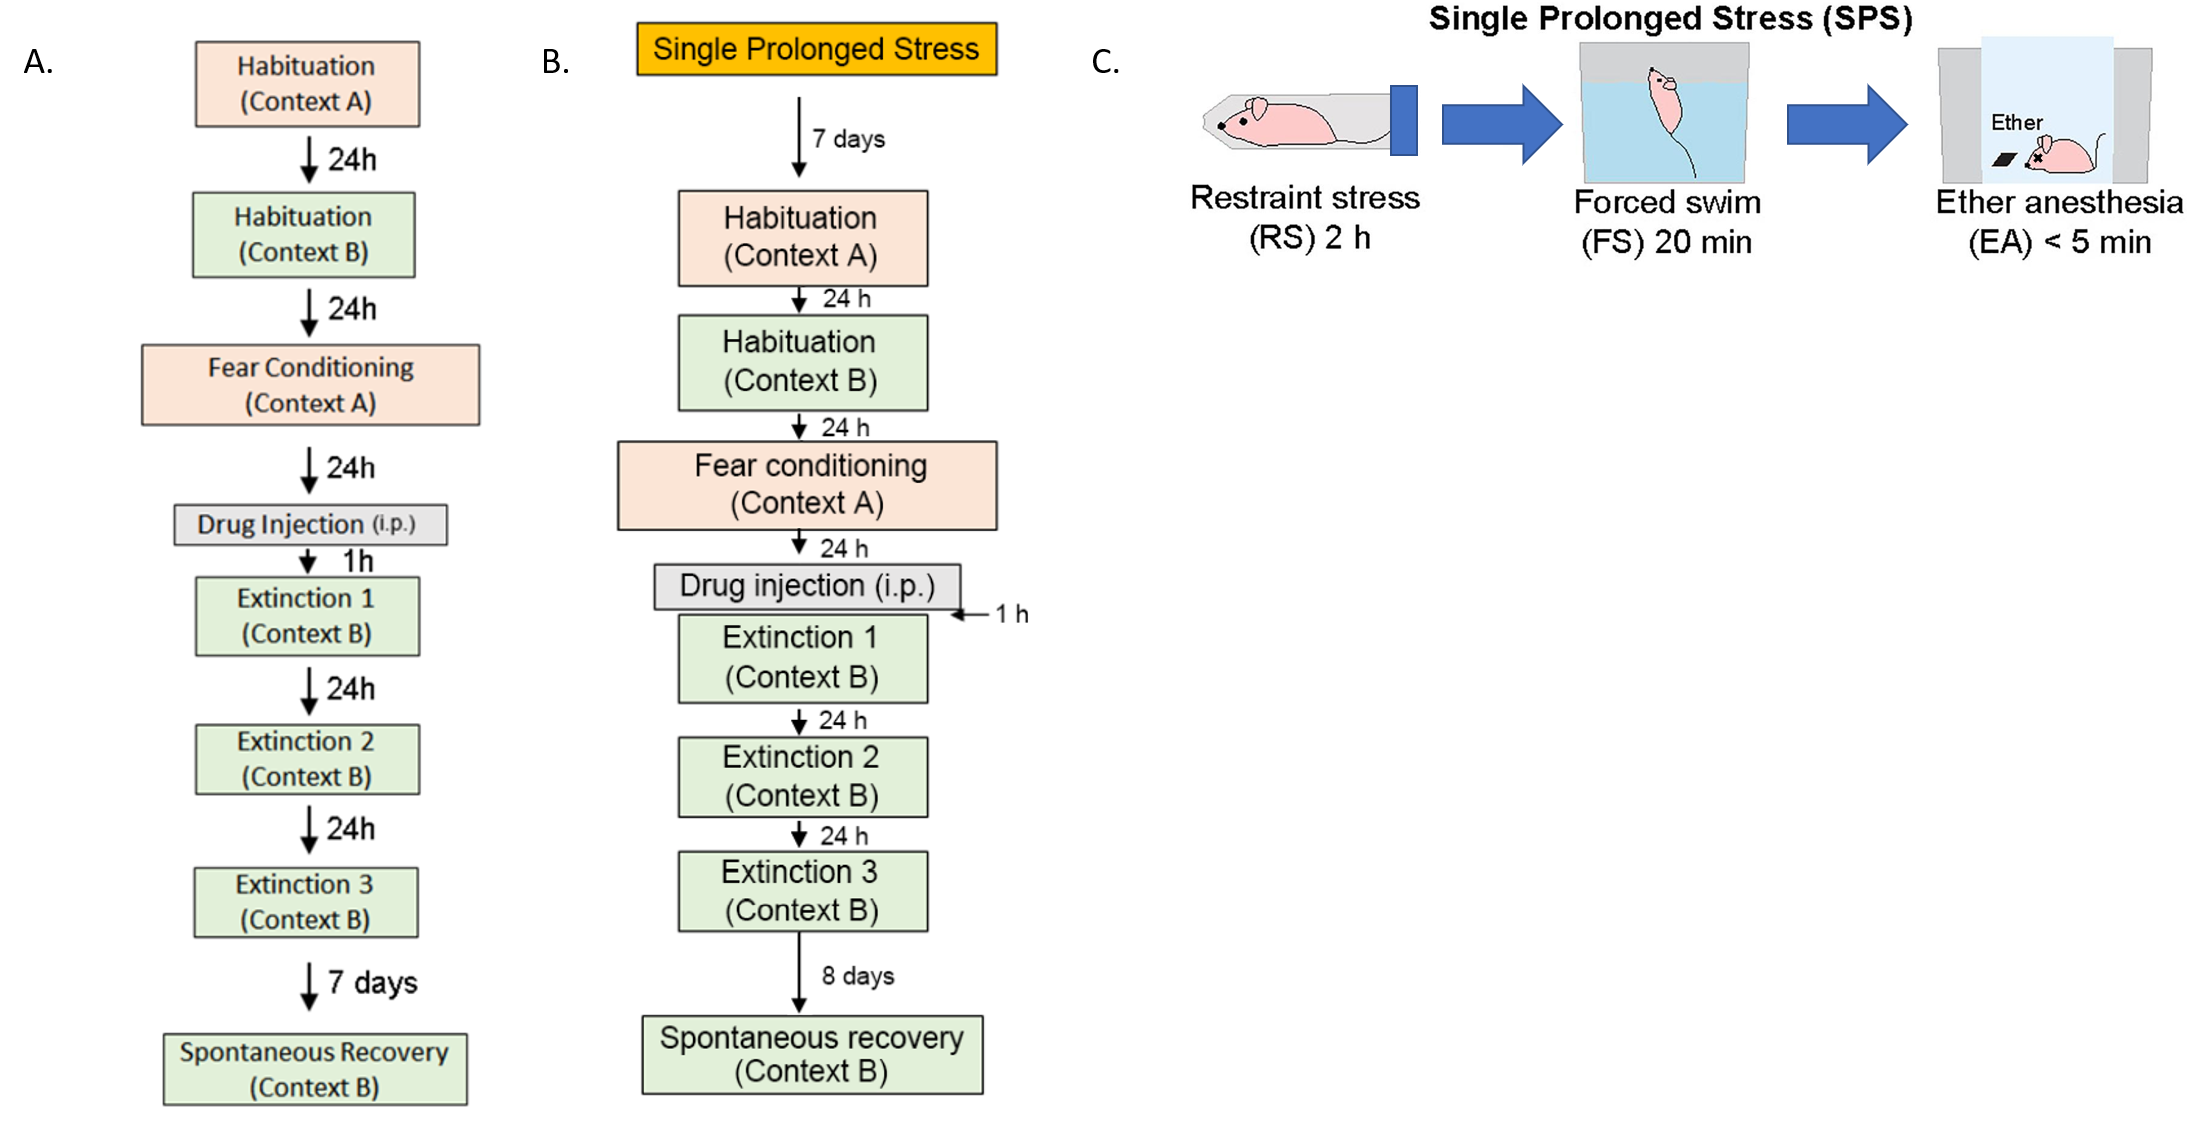 Figure 1. Experimental setup using a mouse model of PTSD. A) auditory fear conditioning model, B) single prolonged stress model, and C) schematic of single prolonged stress inflicted on the animals.